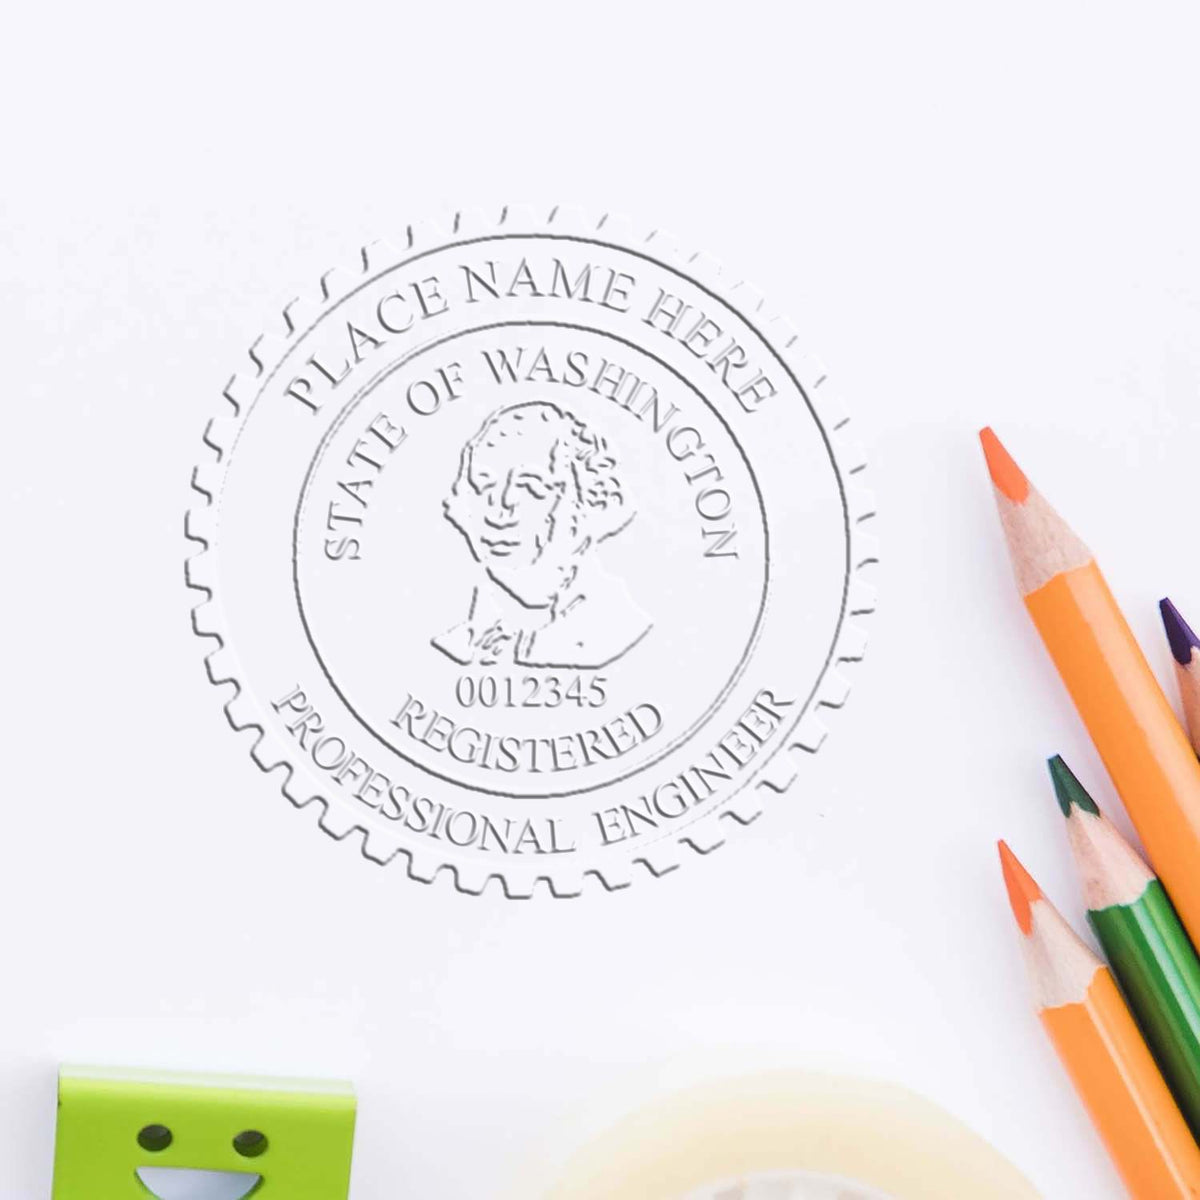 The Heavy Duty Cast Iron Washington Engineer Seal Embosser stamp impression comes to life with a crisp, detailed photo on paper - showcasing true professional quality.